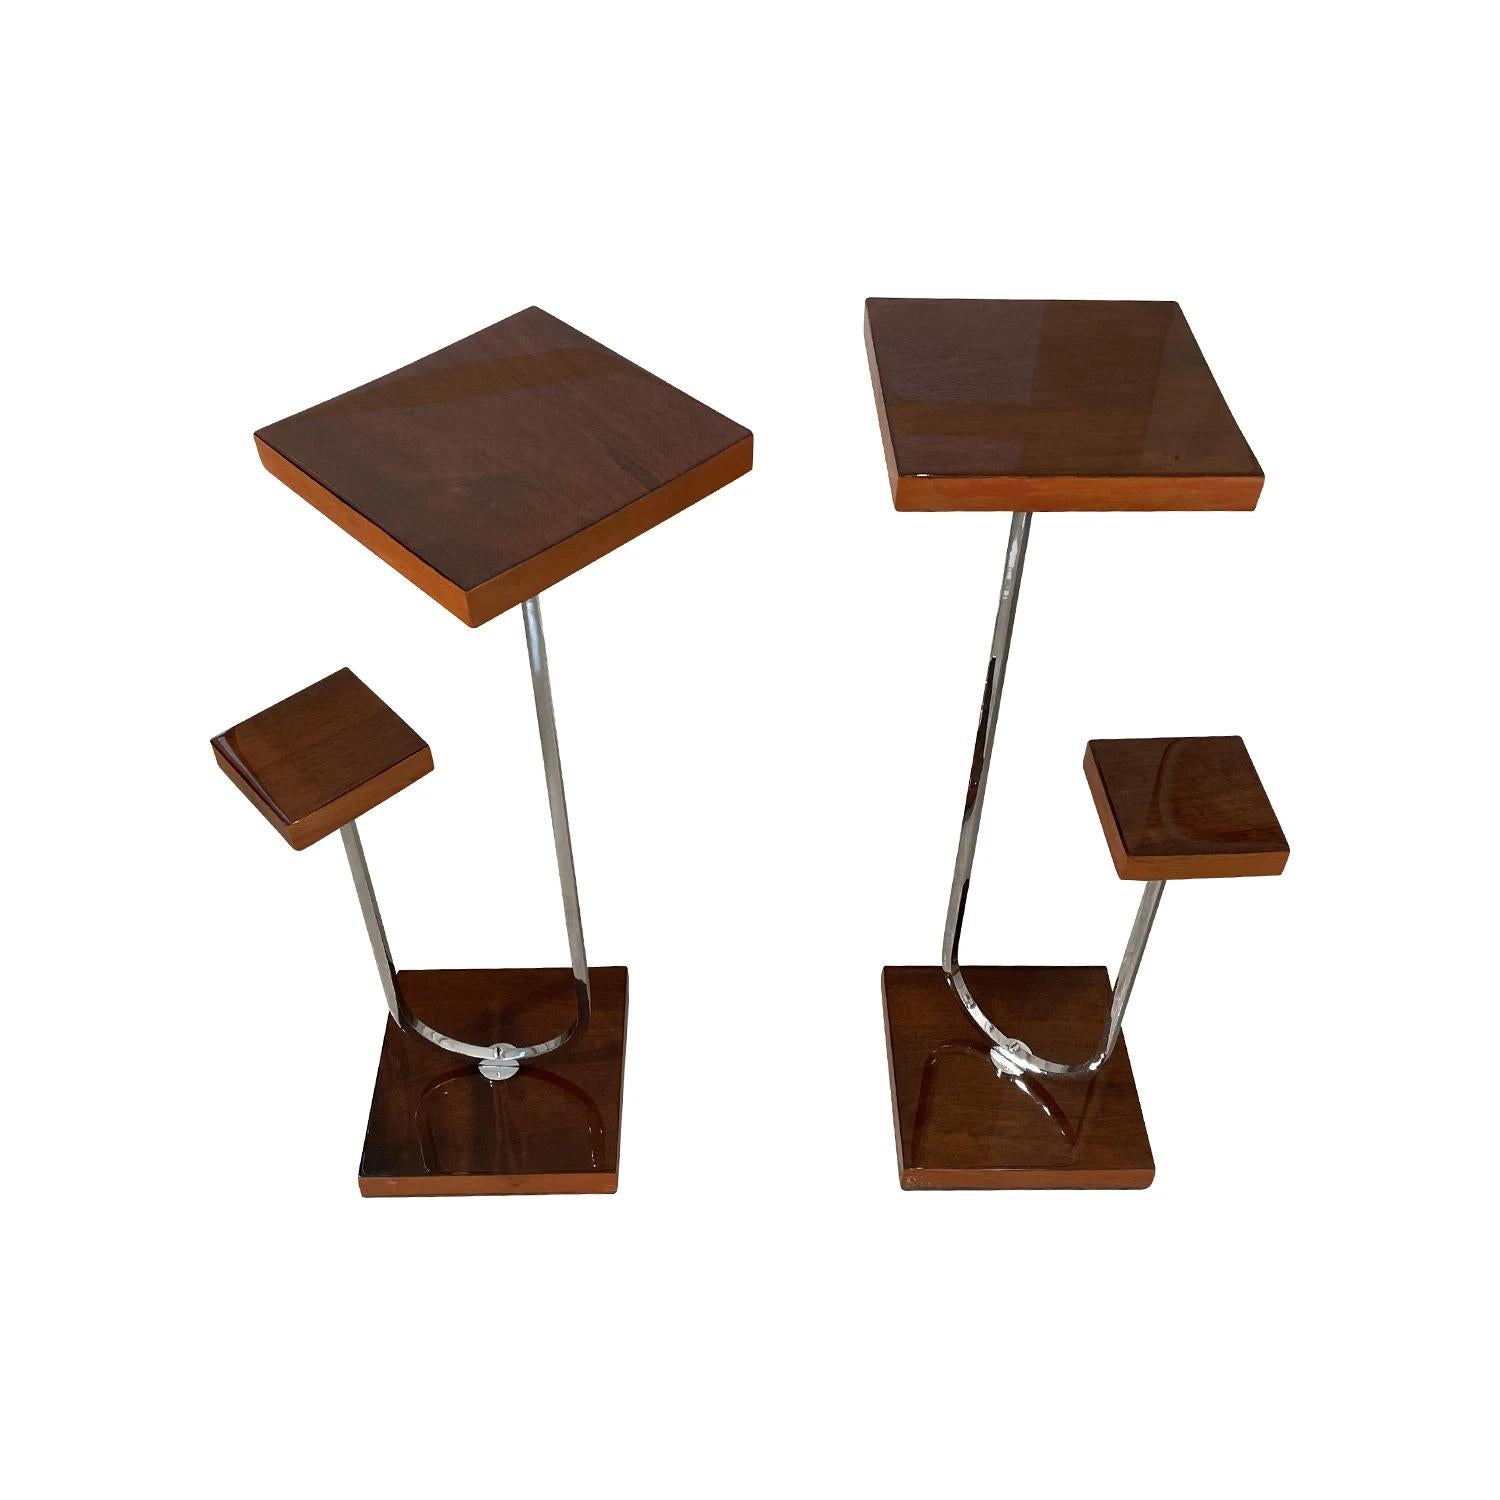 20th Century Italian Art Deco Pair of Small Mahogany Pedestals, Side Tables In Good Condition For Sale In West Palm Beach, FL